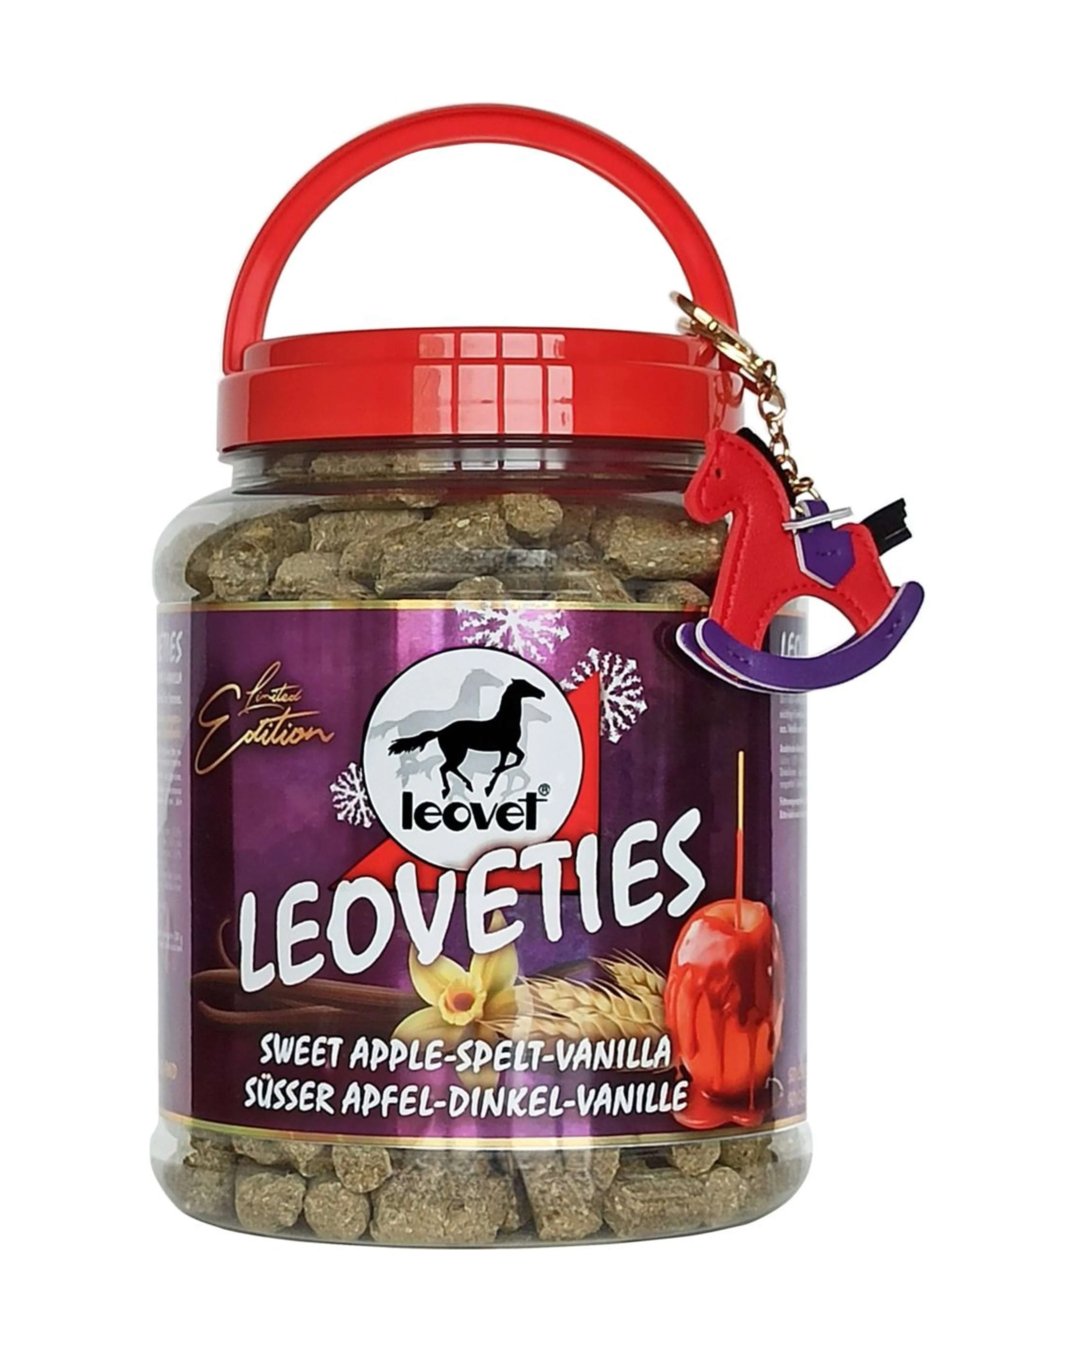 Leckerlis Leoveties Limited Edition